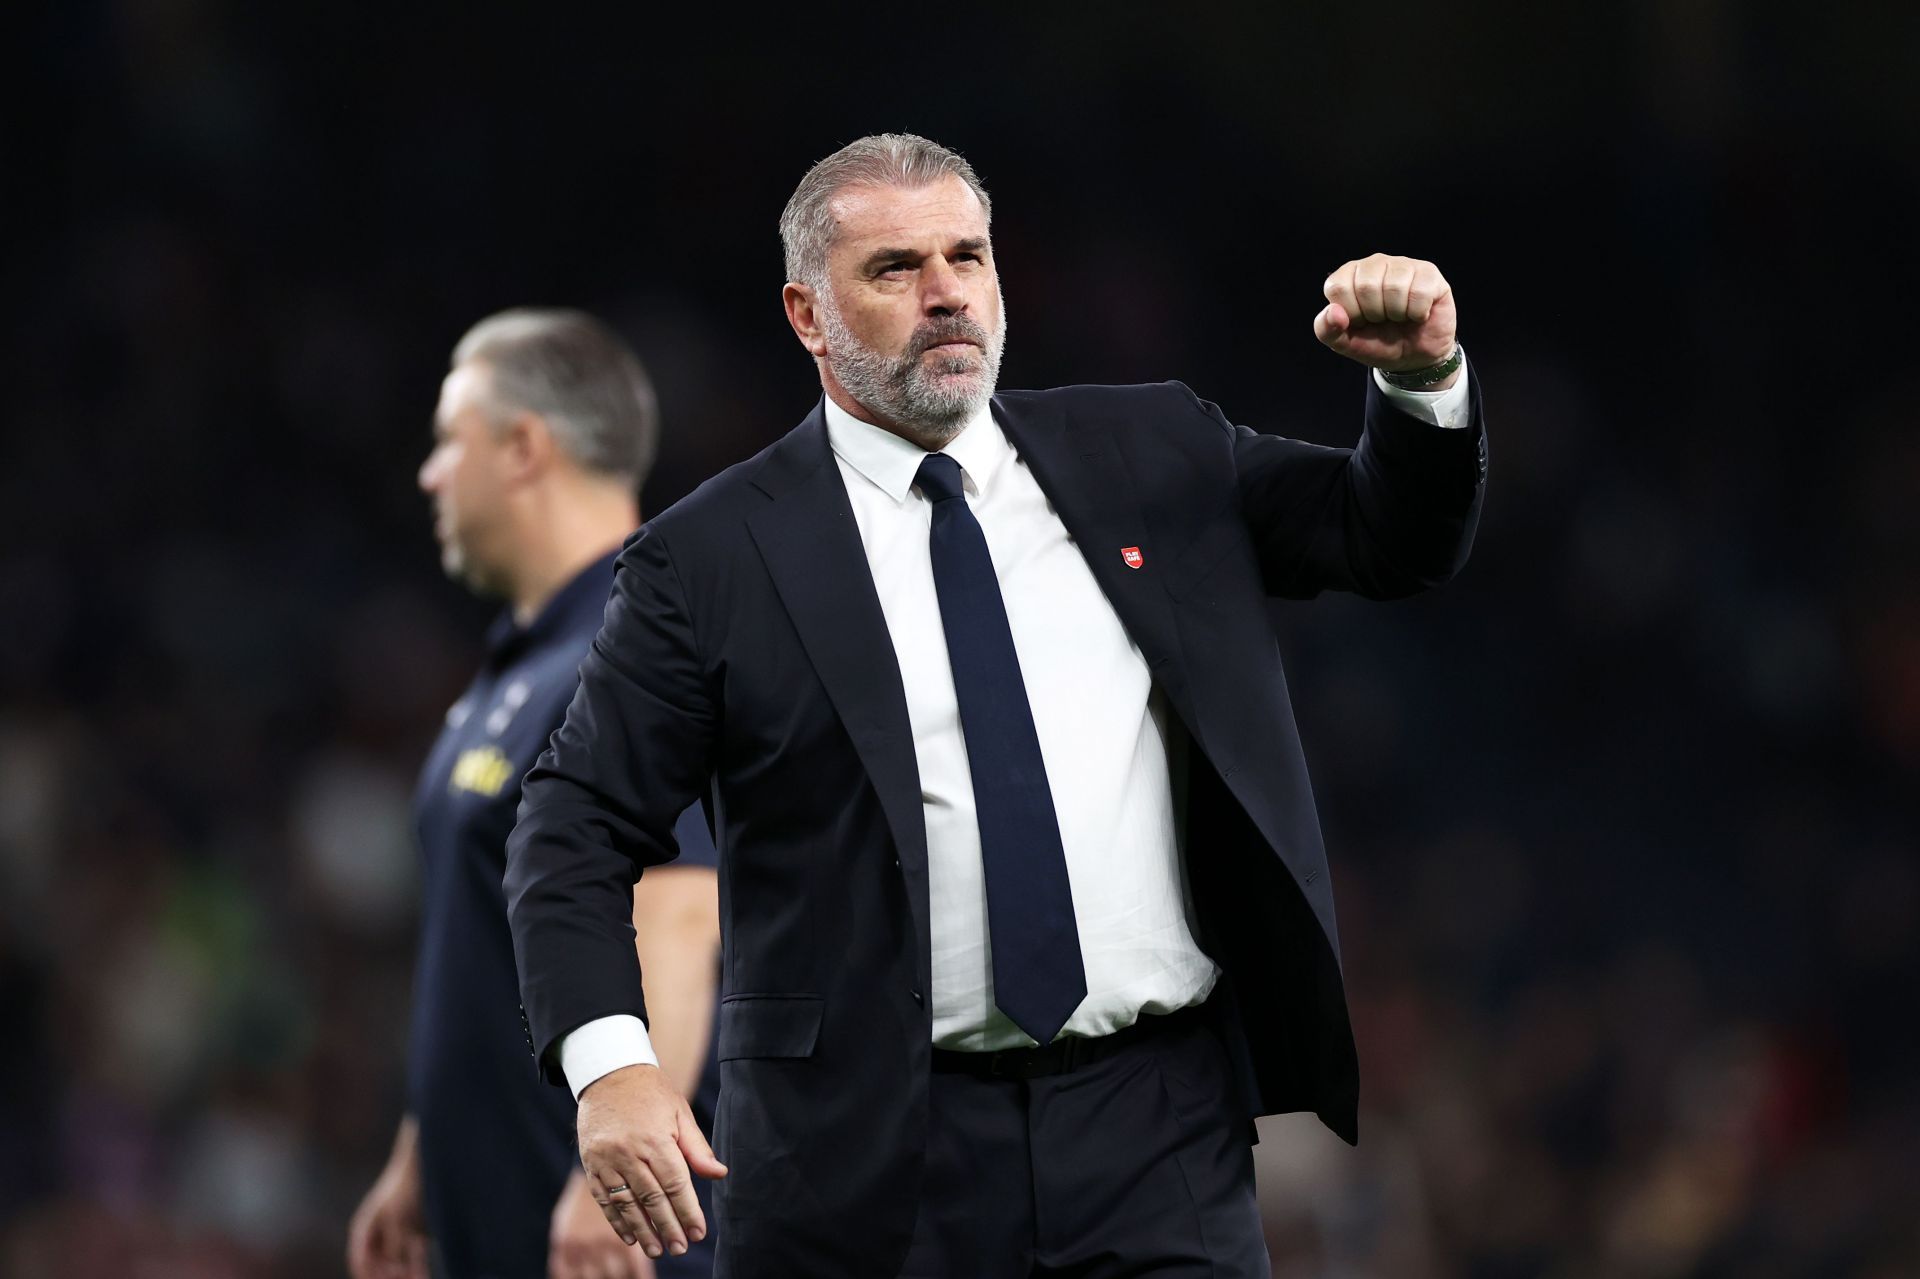 Ange Postecoglou is backed to become Manchester United boss.